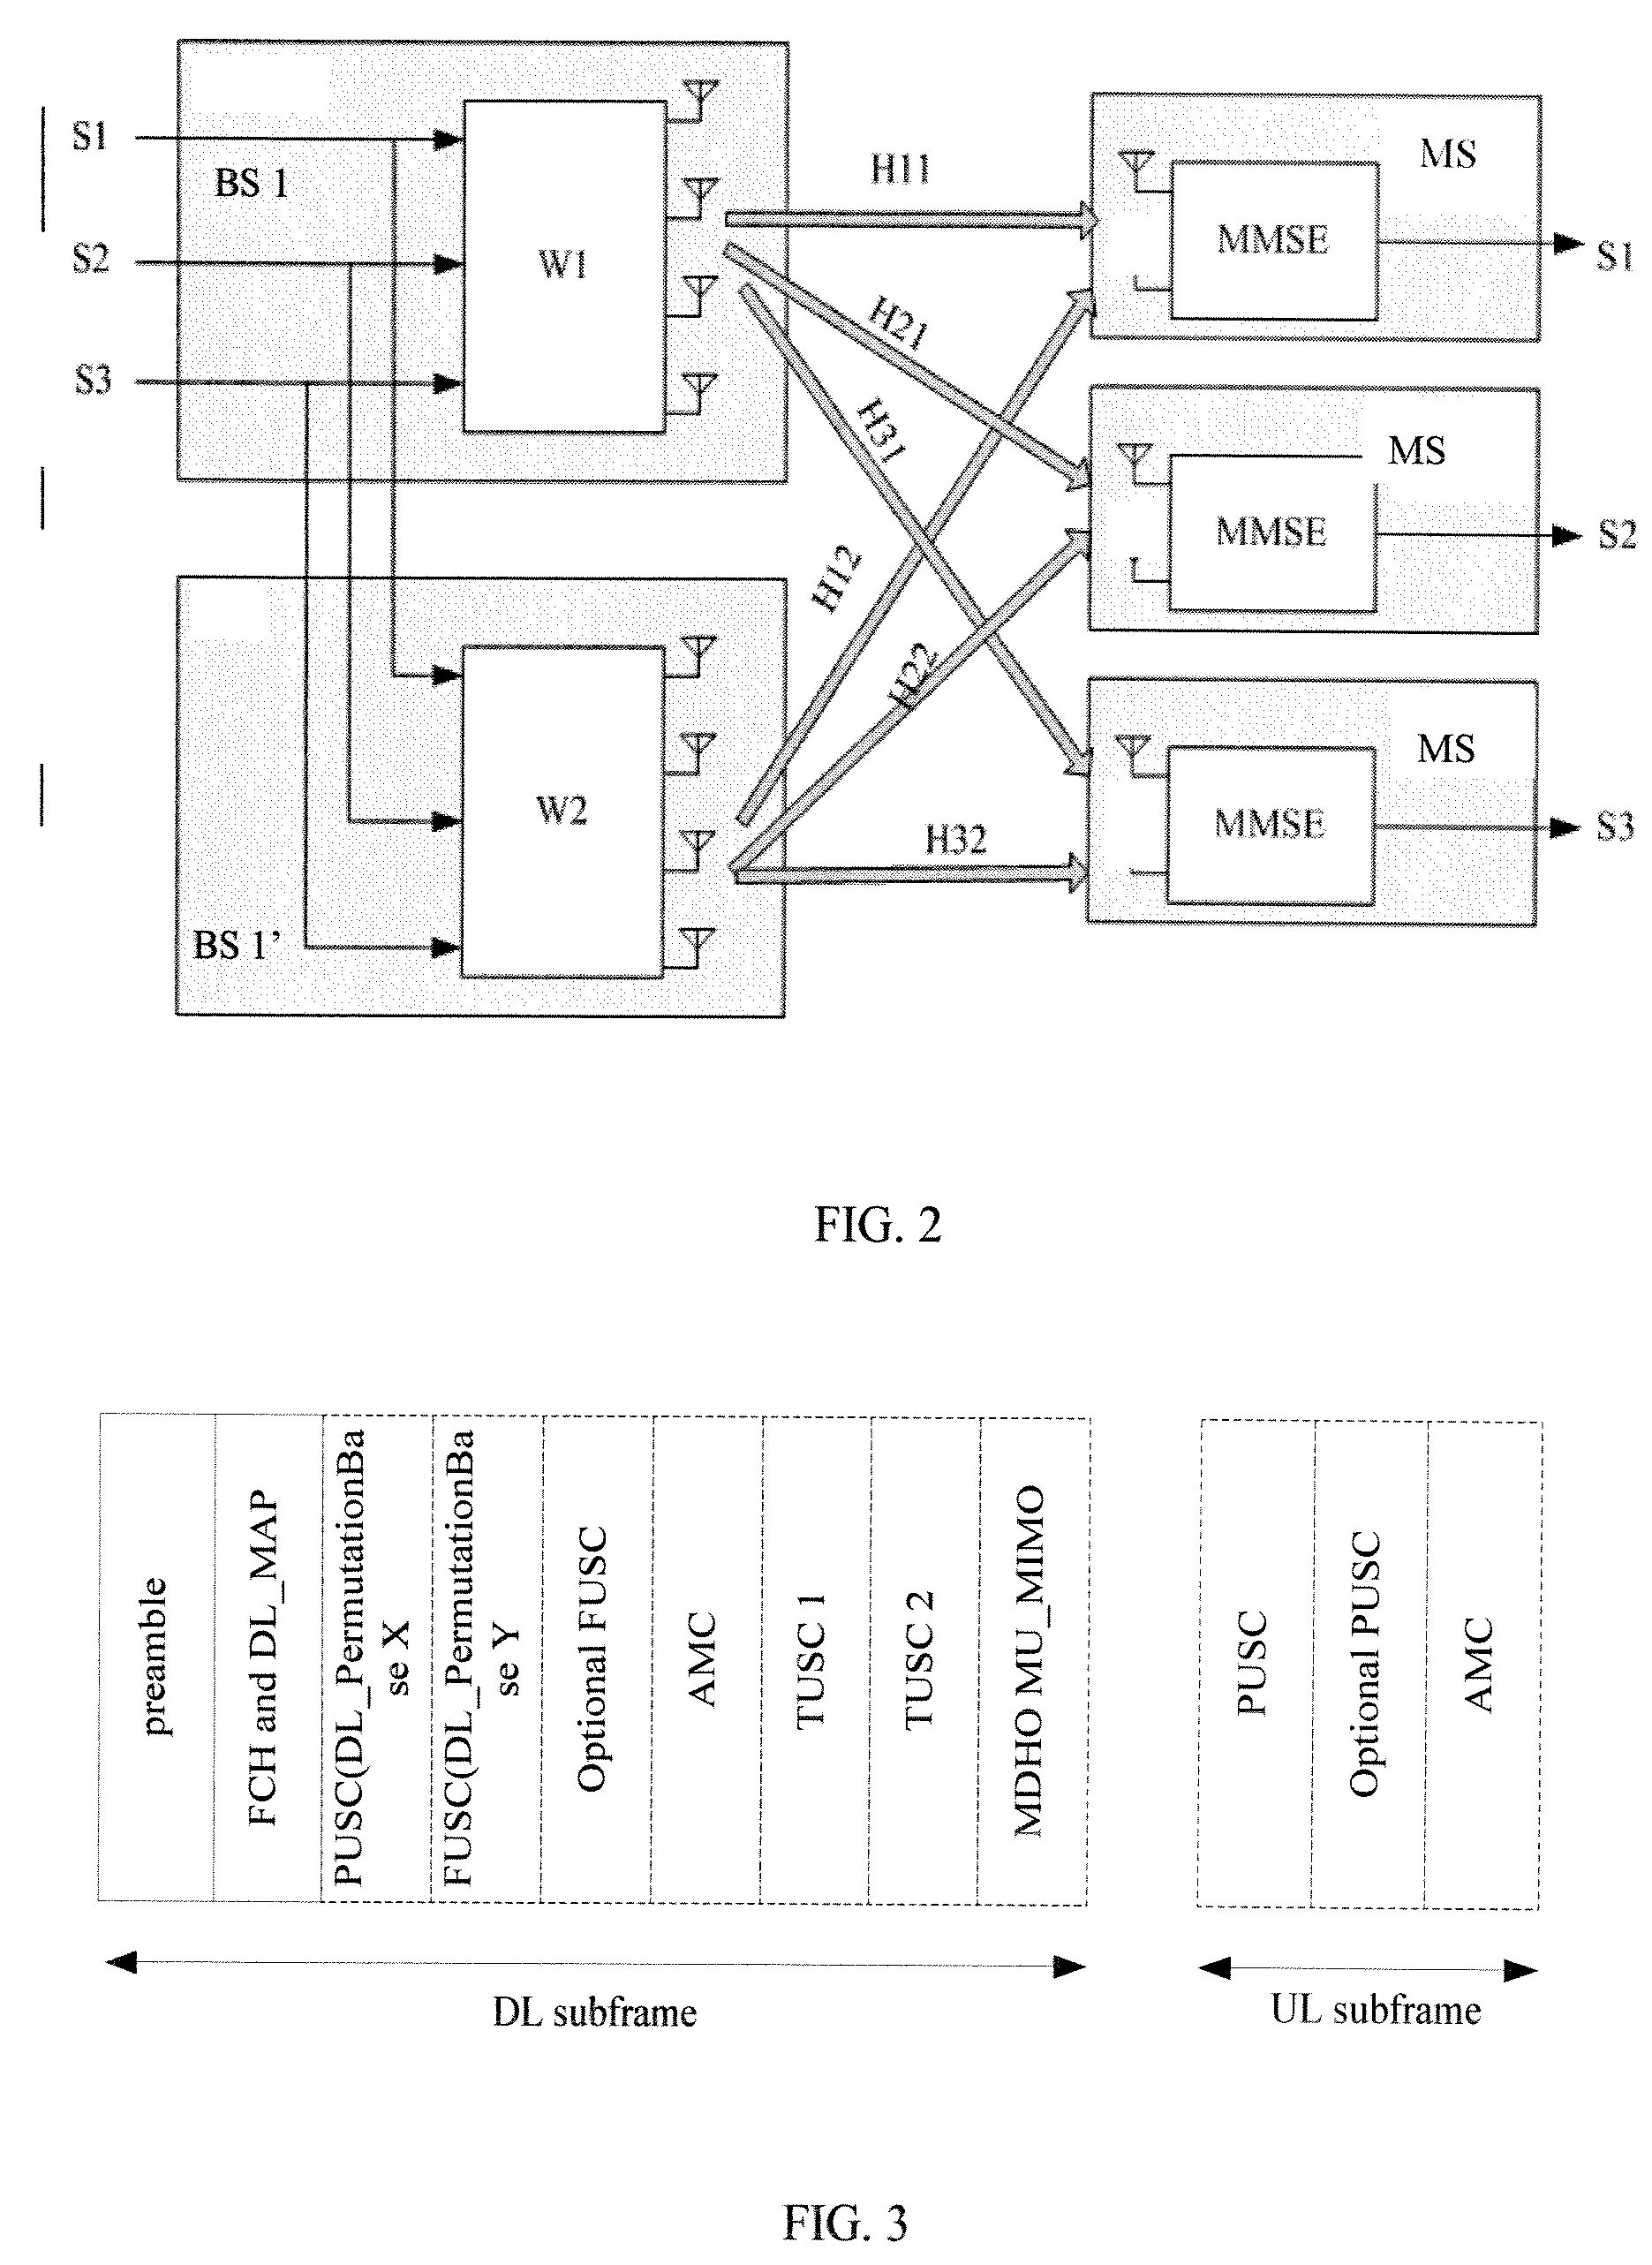 Method and device for canceling the interference among signals received by multiple mobile stations